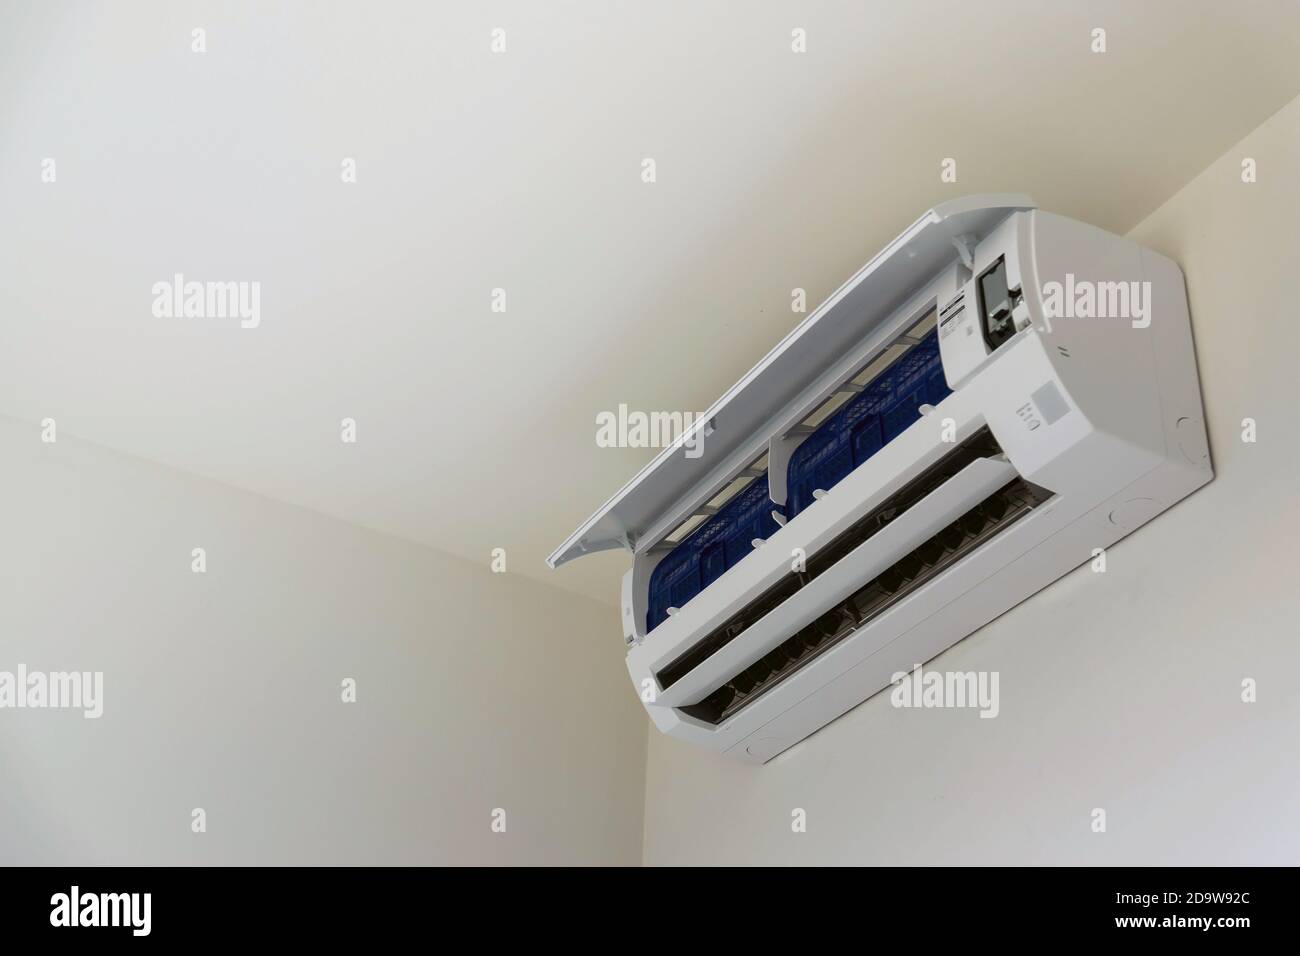 Wall mounted air conditioner, used for home or office. Stock Photo